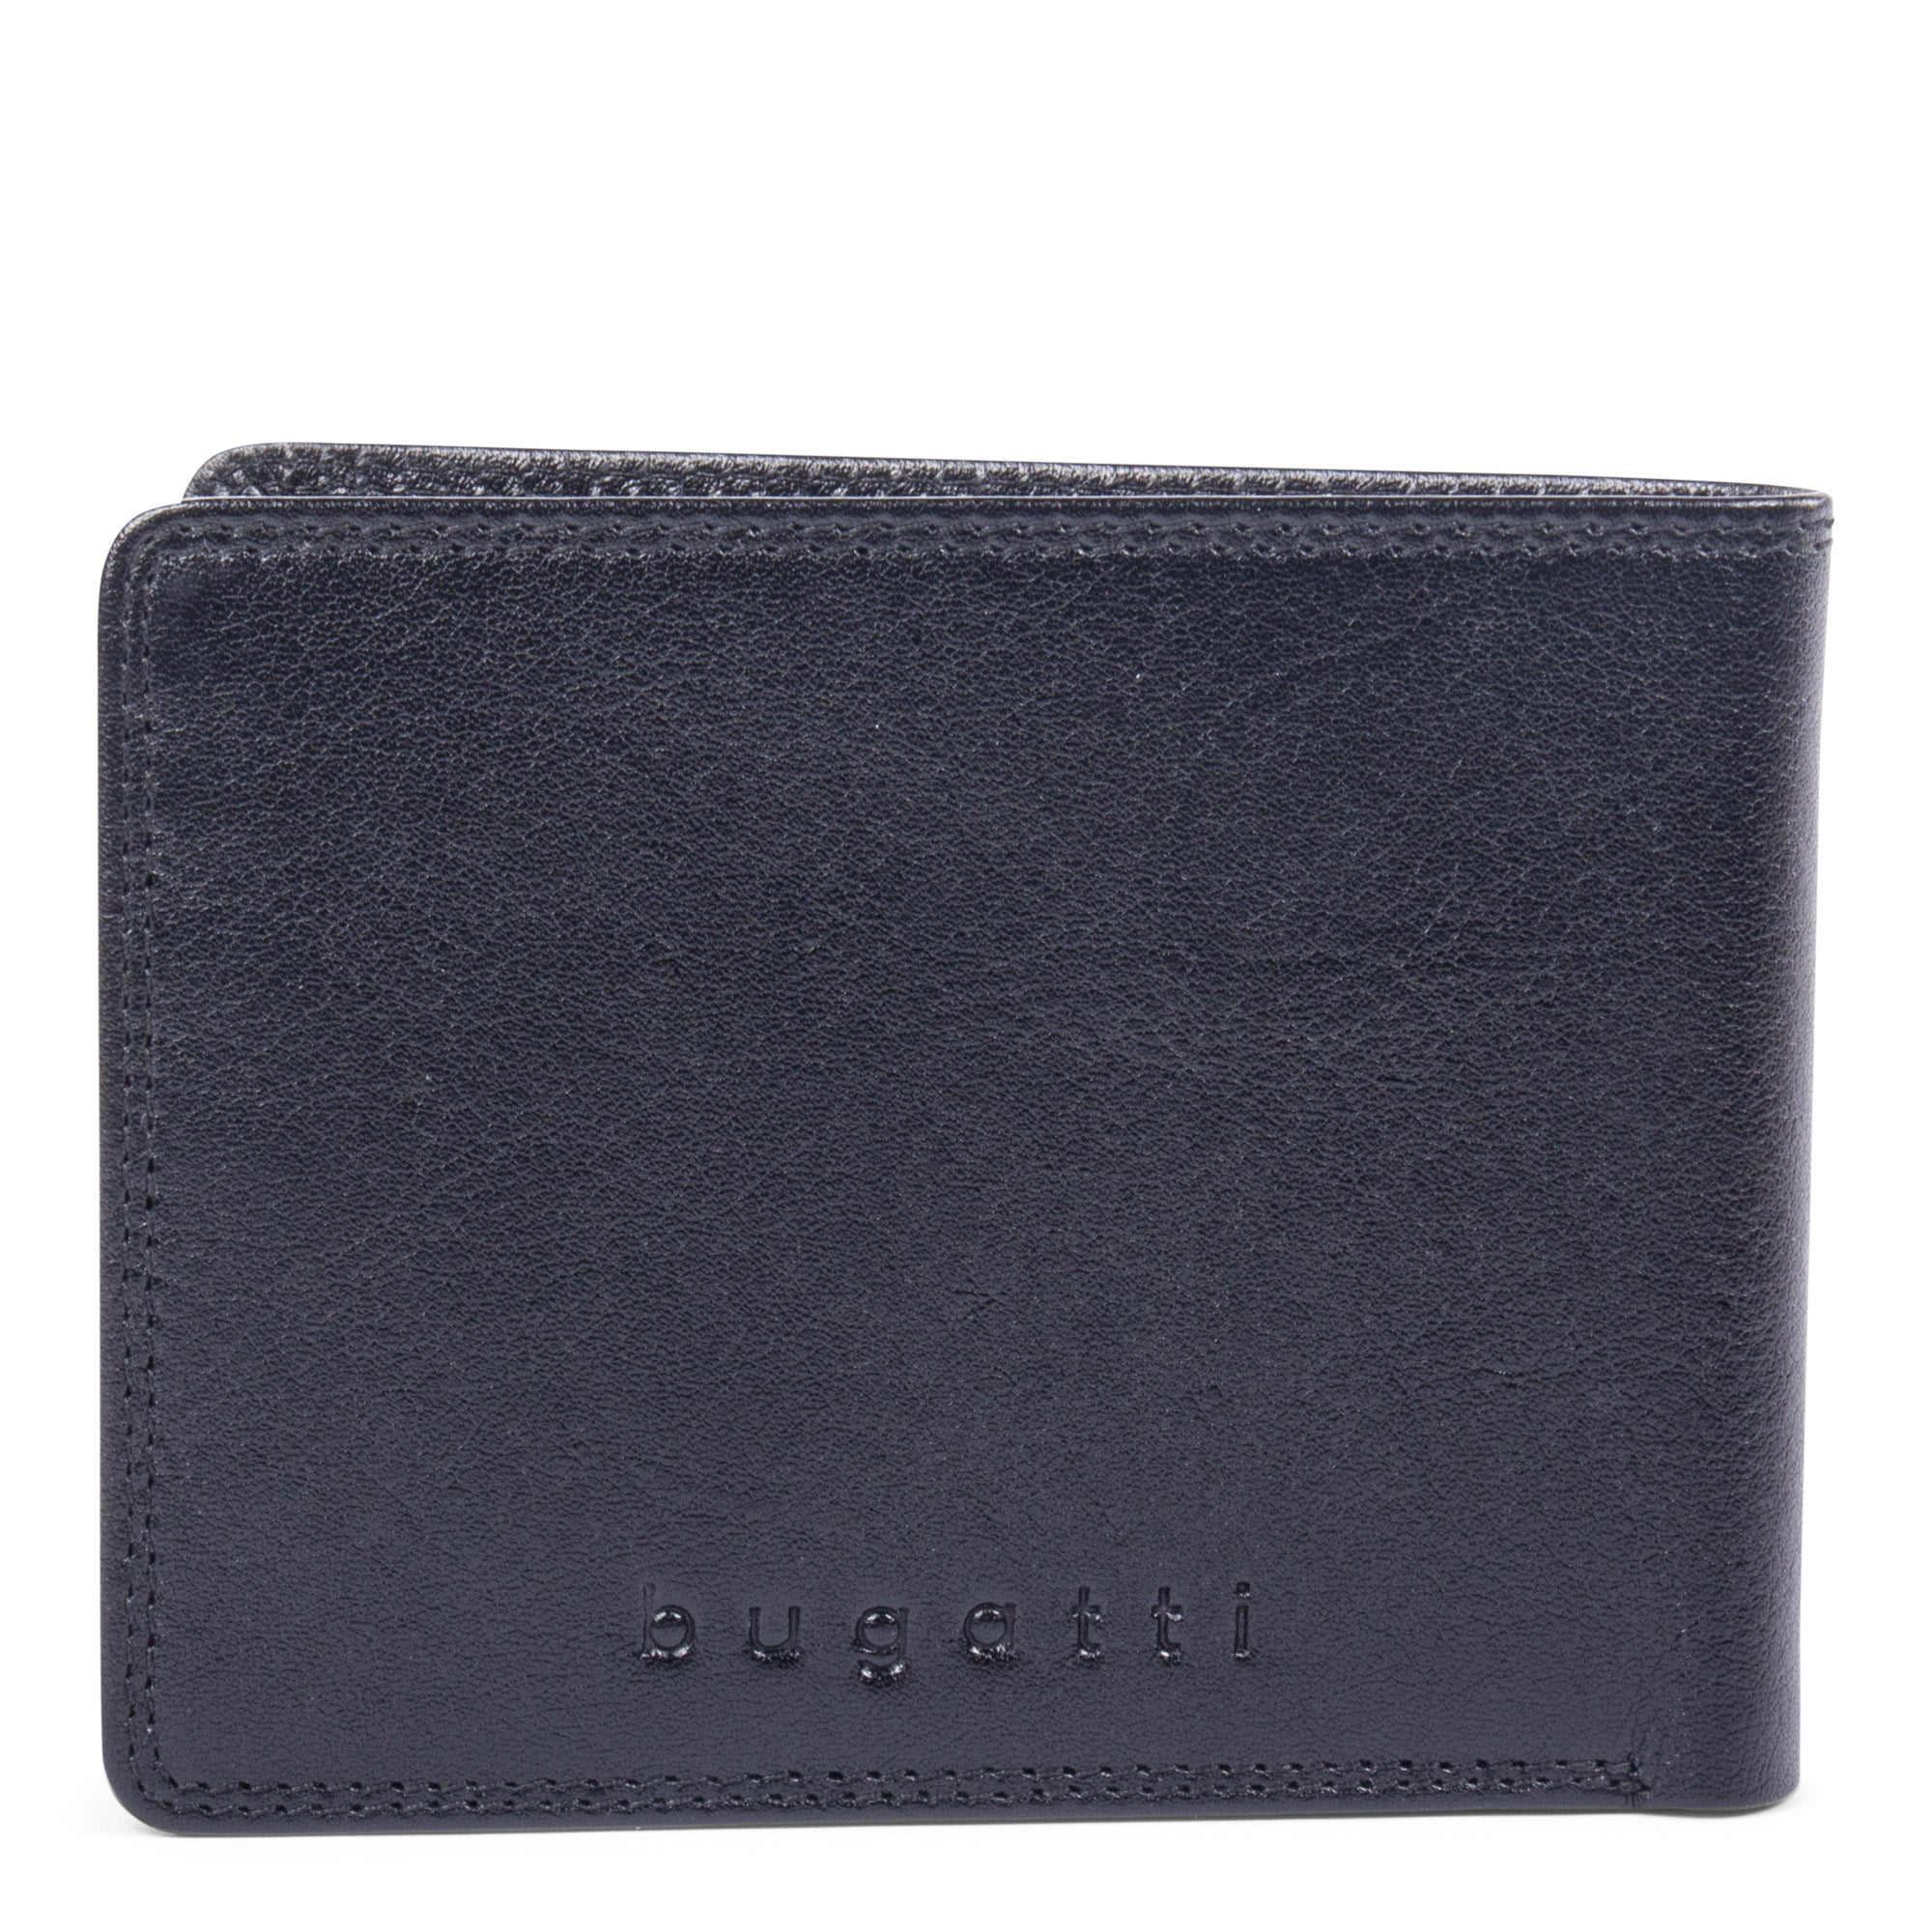 Leather – Bugatti wallet Collections Billfold